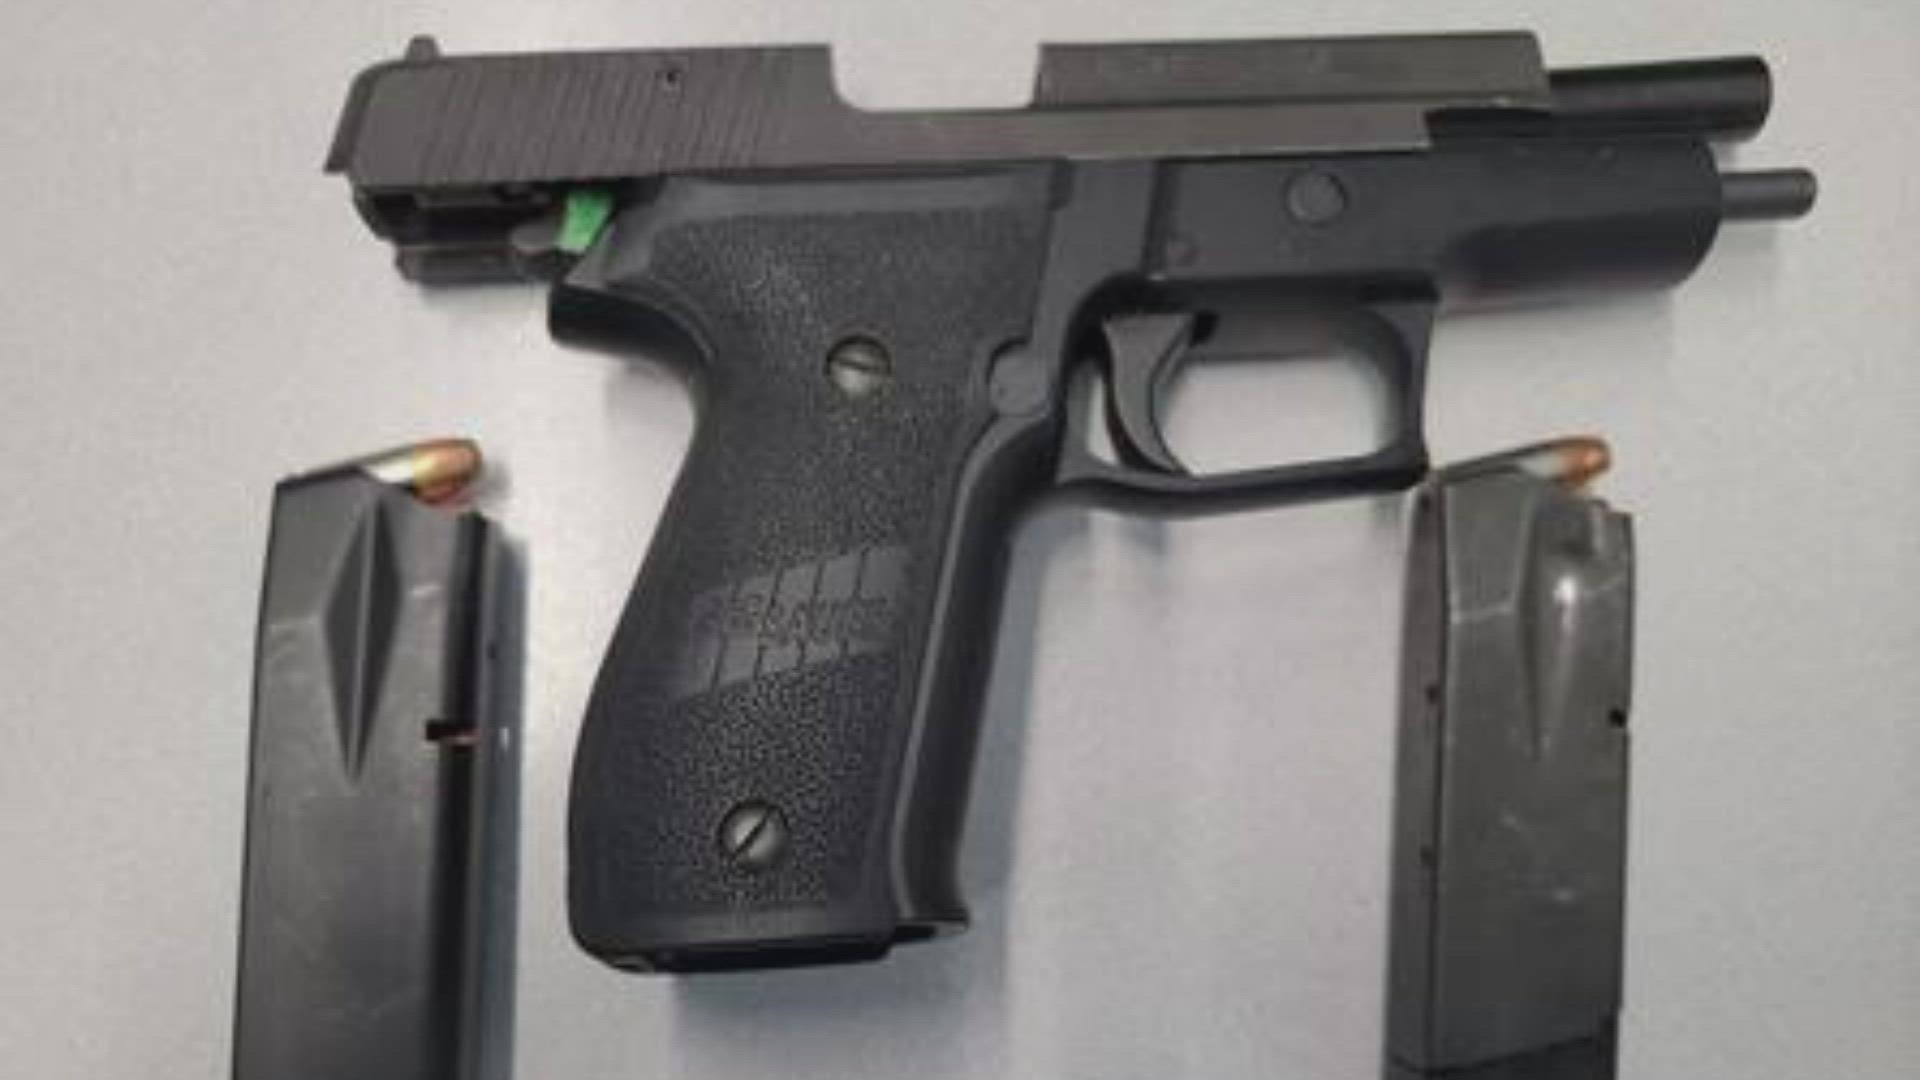 The TSA says it stopped 4 firearms at the Indianapolis airport security checkpoint in the last seven days.